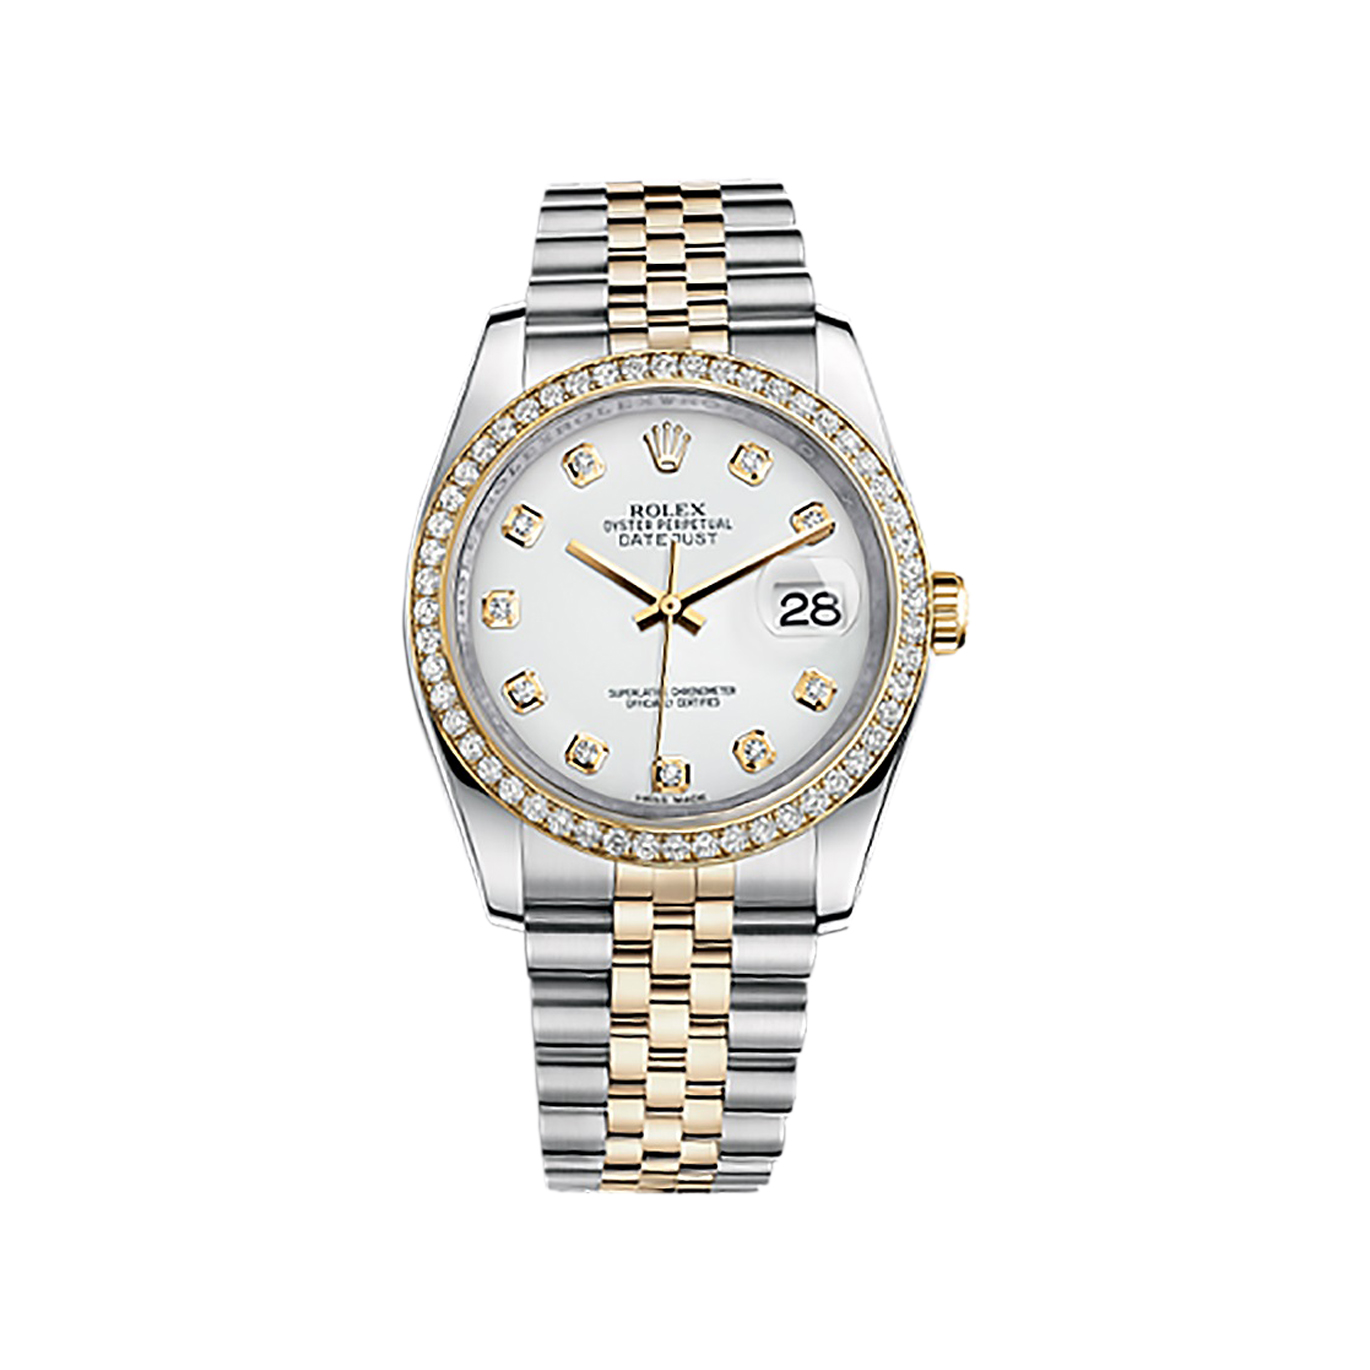 Datejust 36 116243 Gold & Stainless Steel Watch (White Set with Diamonds)